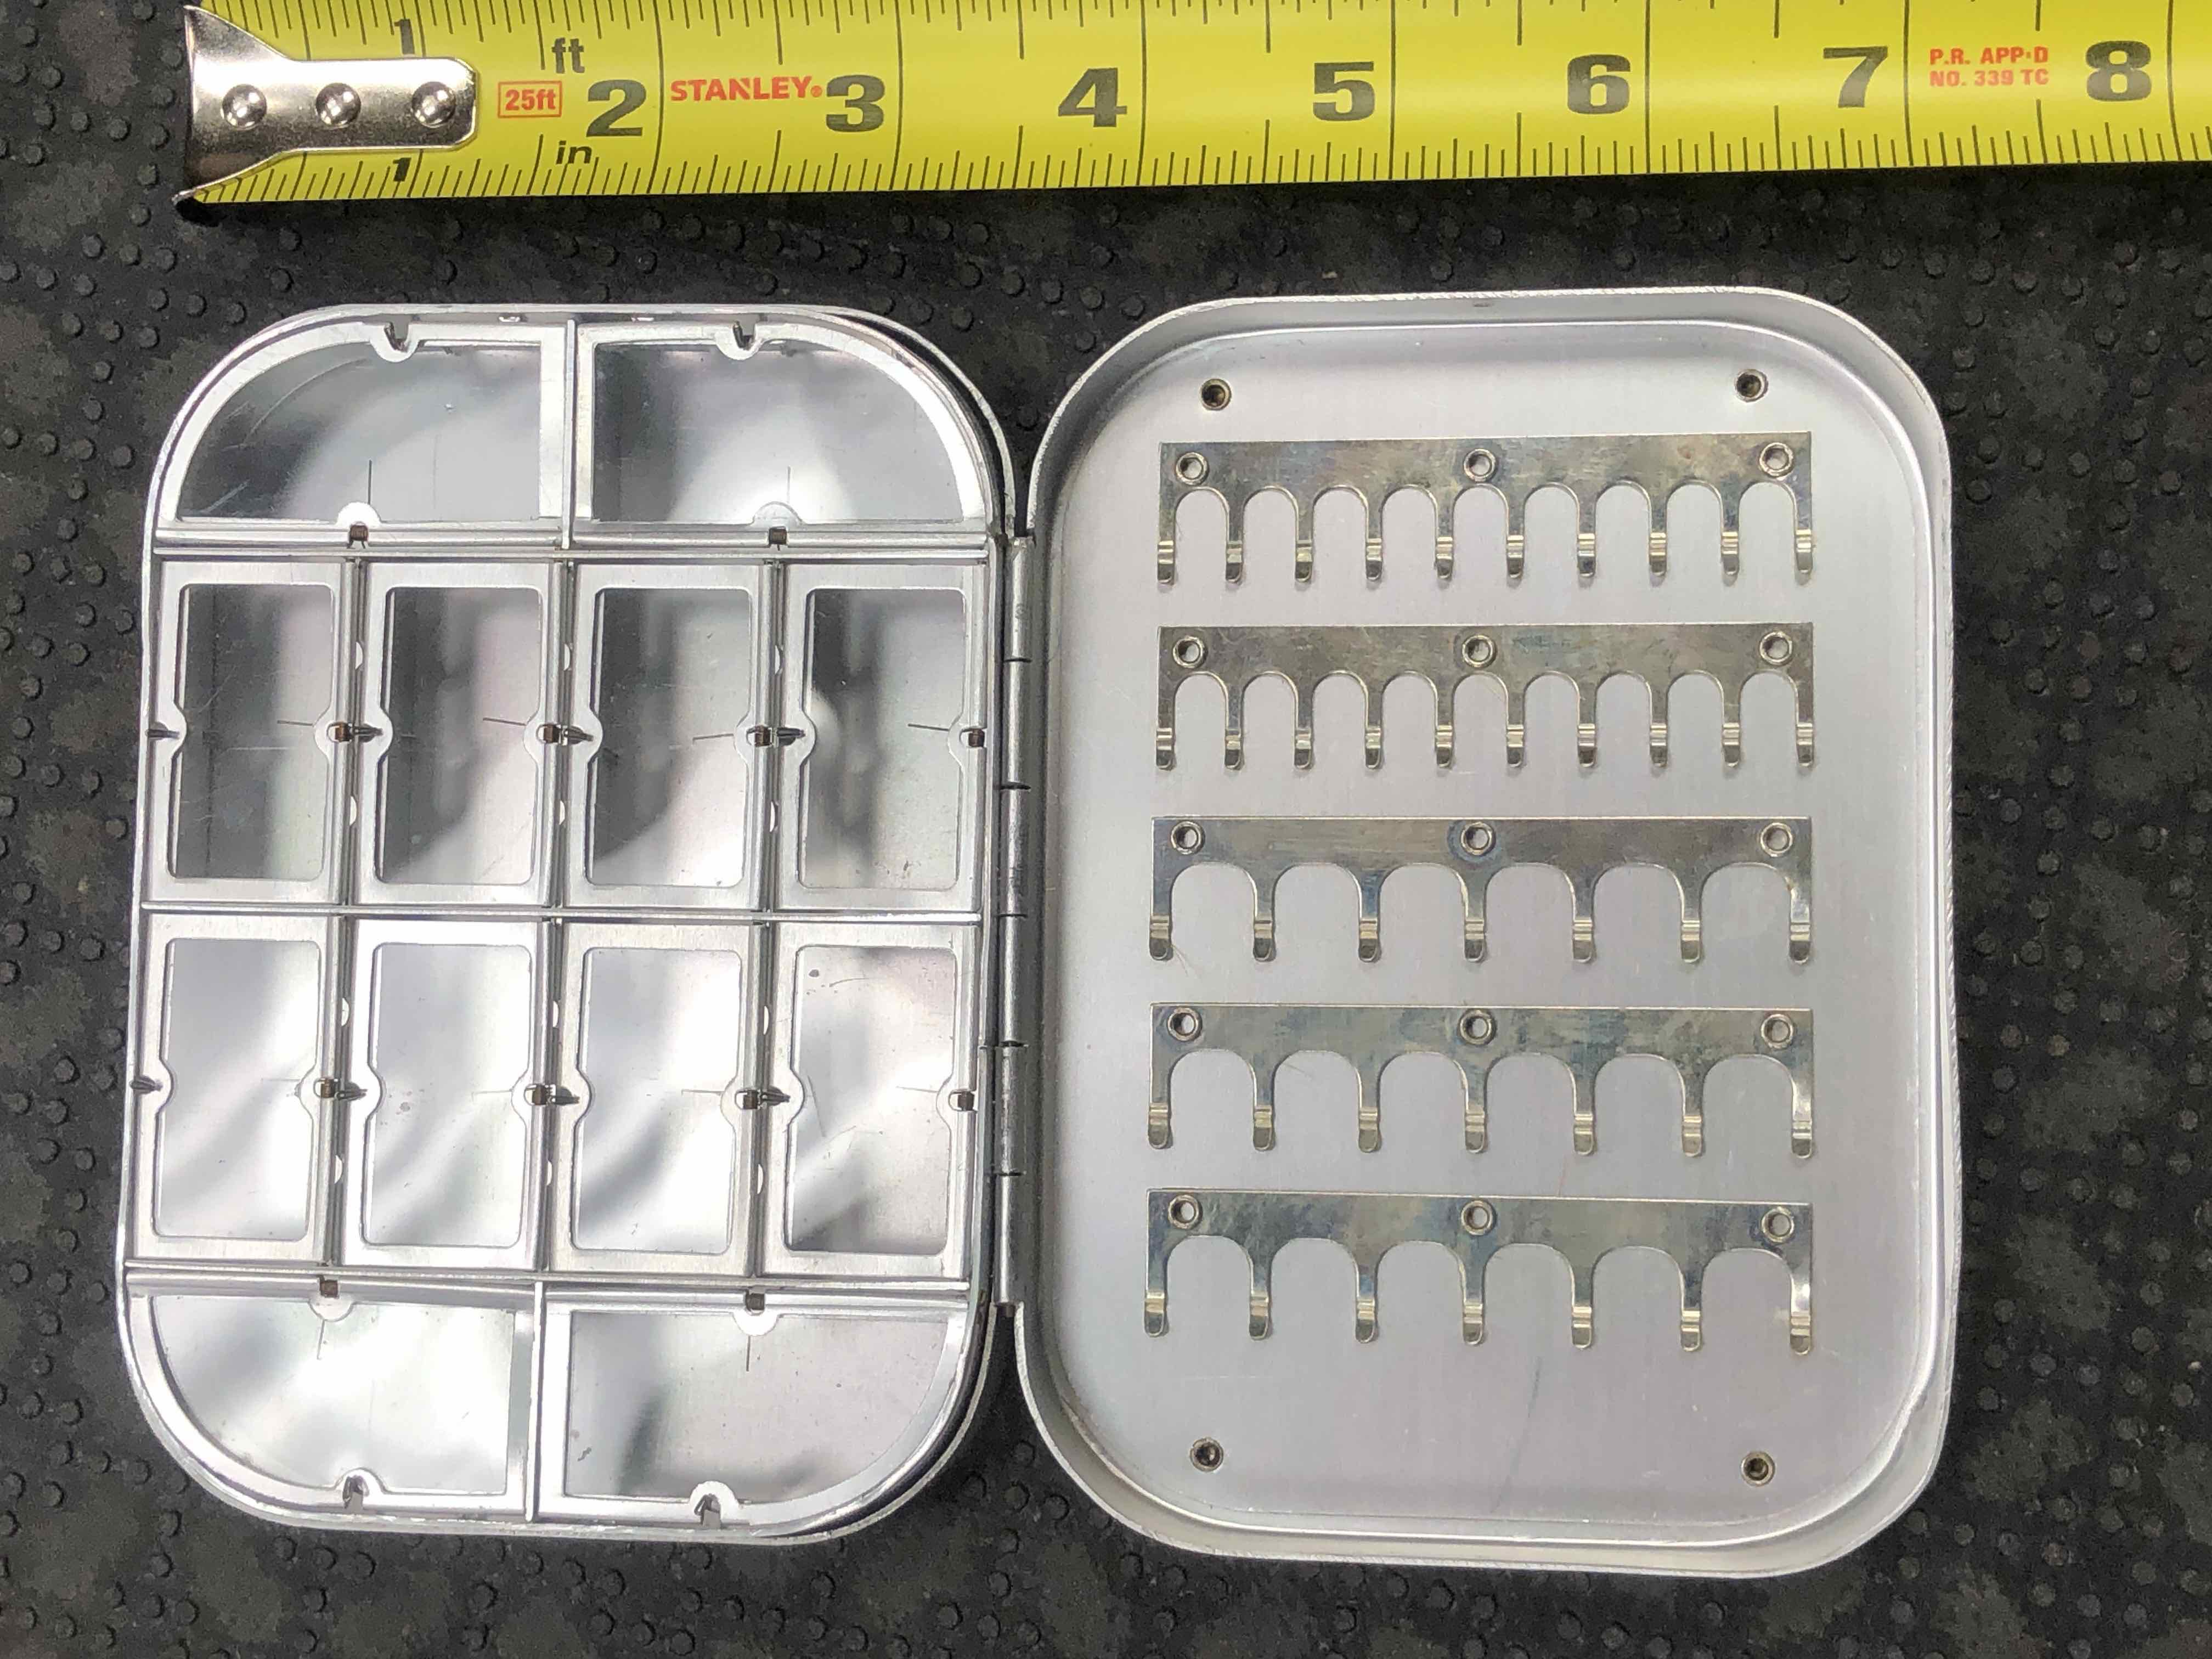 SOLD! – Richard Wheatley Silmalloy Metal Fly Box – 12 Compartment